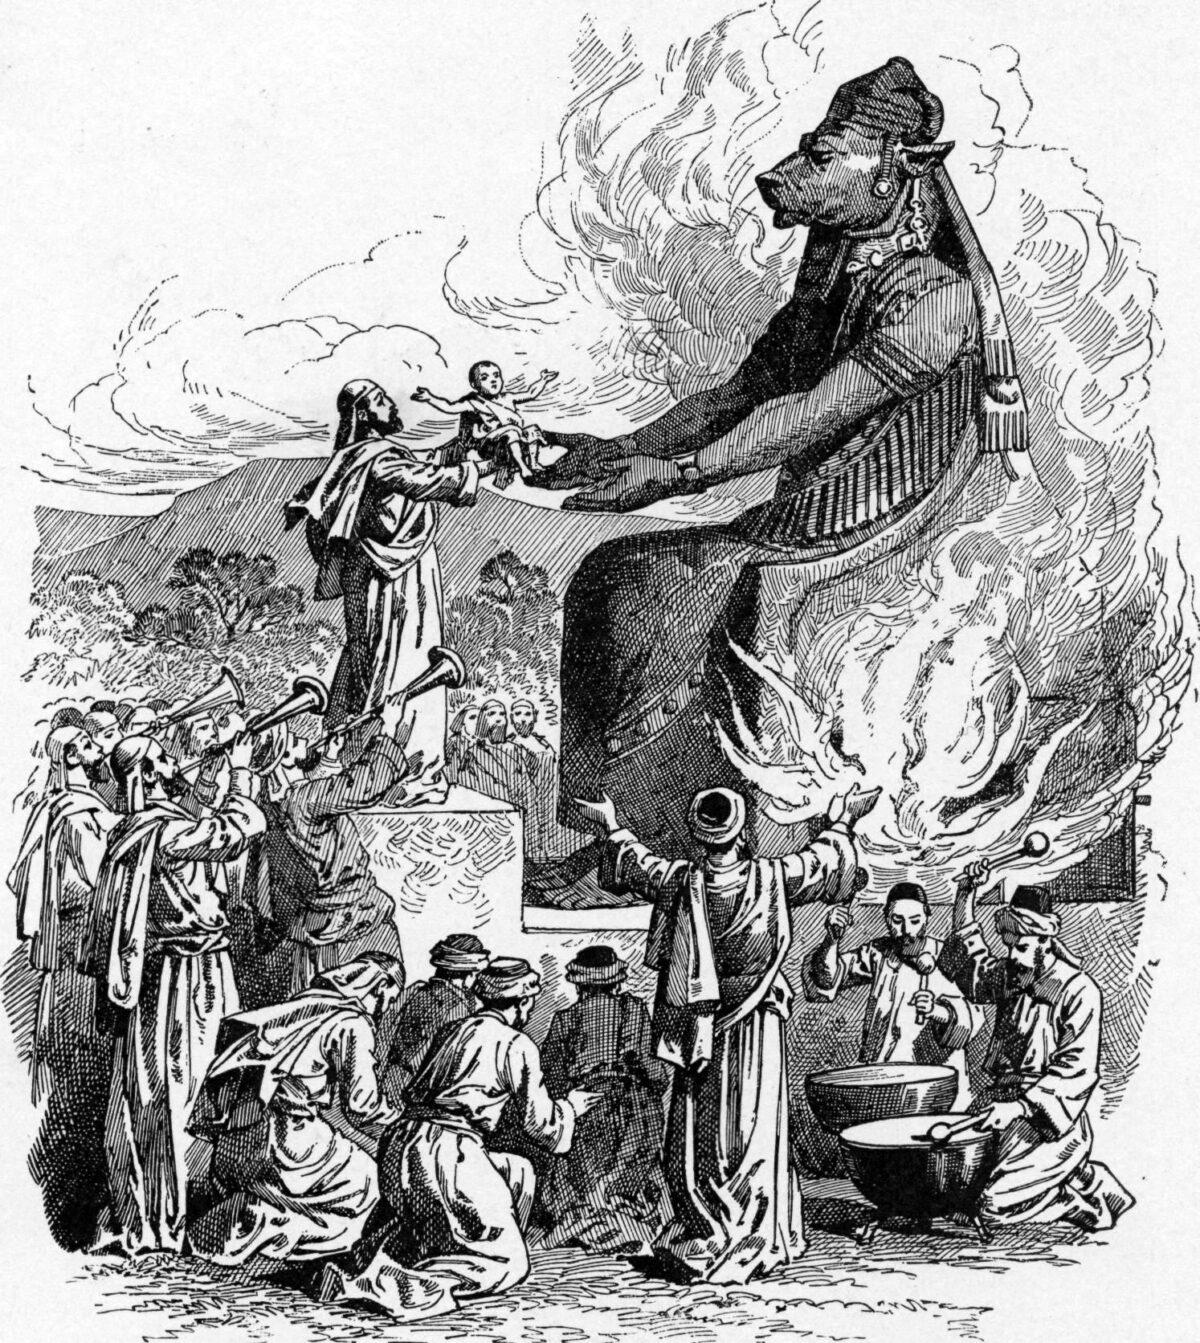 King Ahaz is believed to have been evil, offering his own children as sacrifice to an idol. “Offering to Molech,” illustration by Charles Foster for the 1897 “Bible Pictures and What They Teach Us.” (Public Domain)